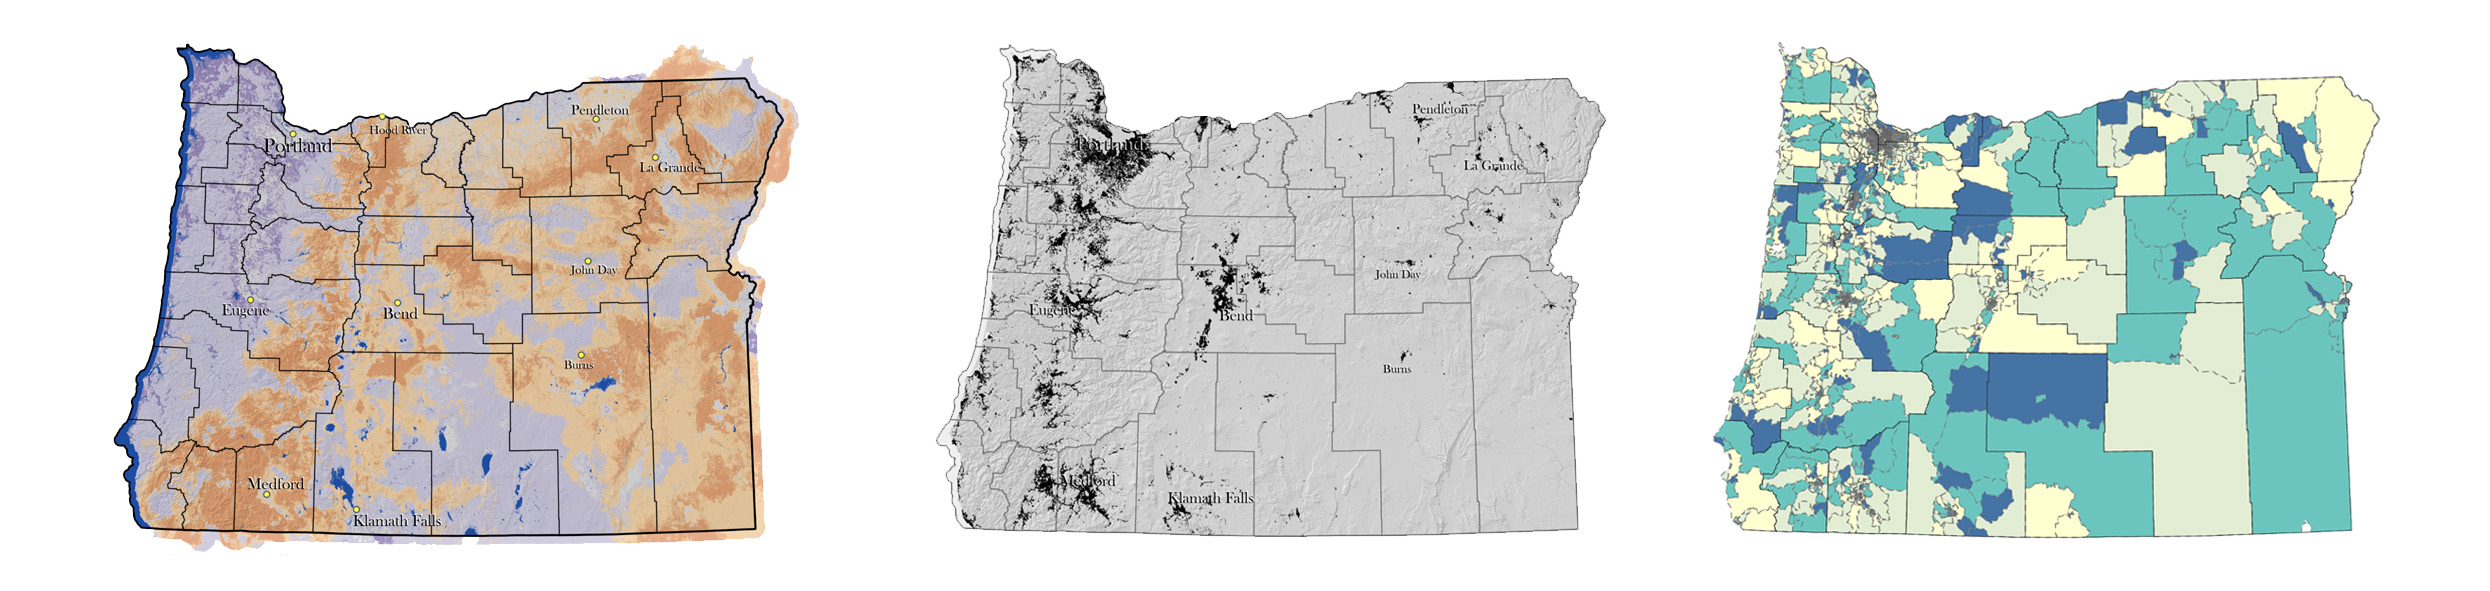 Oregon wildfire risk maps in a row